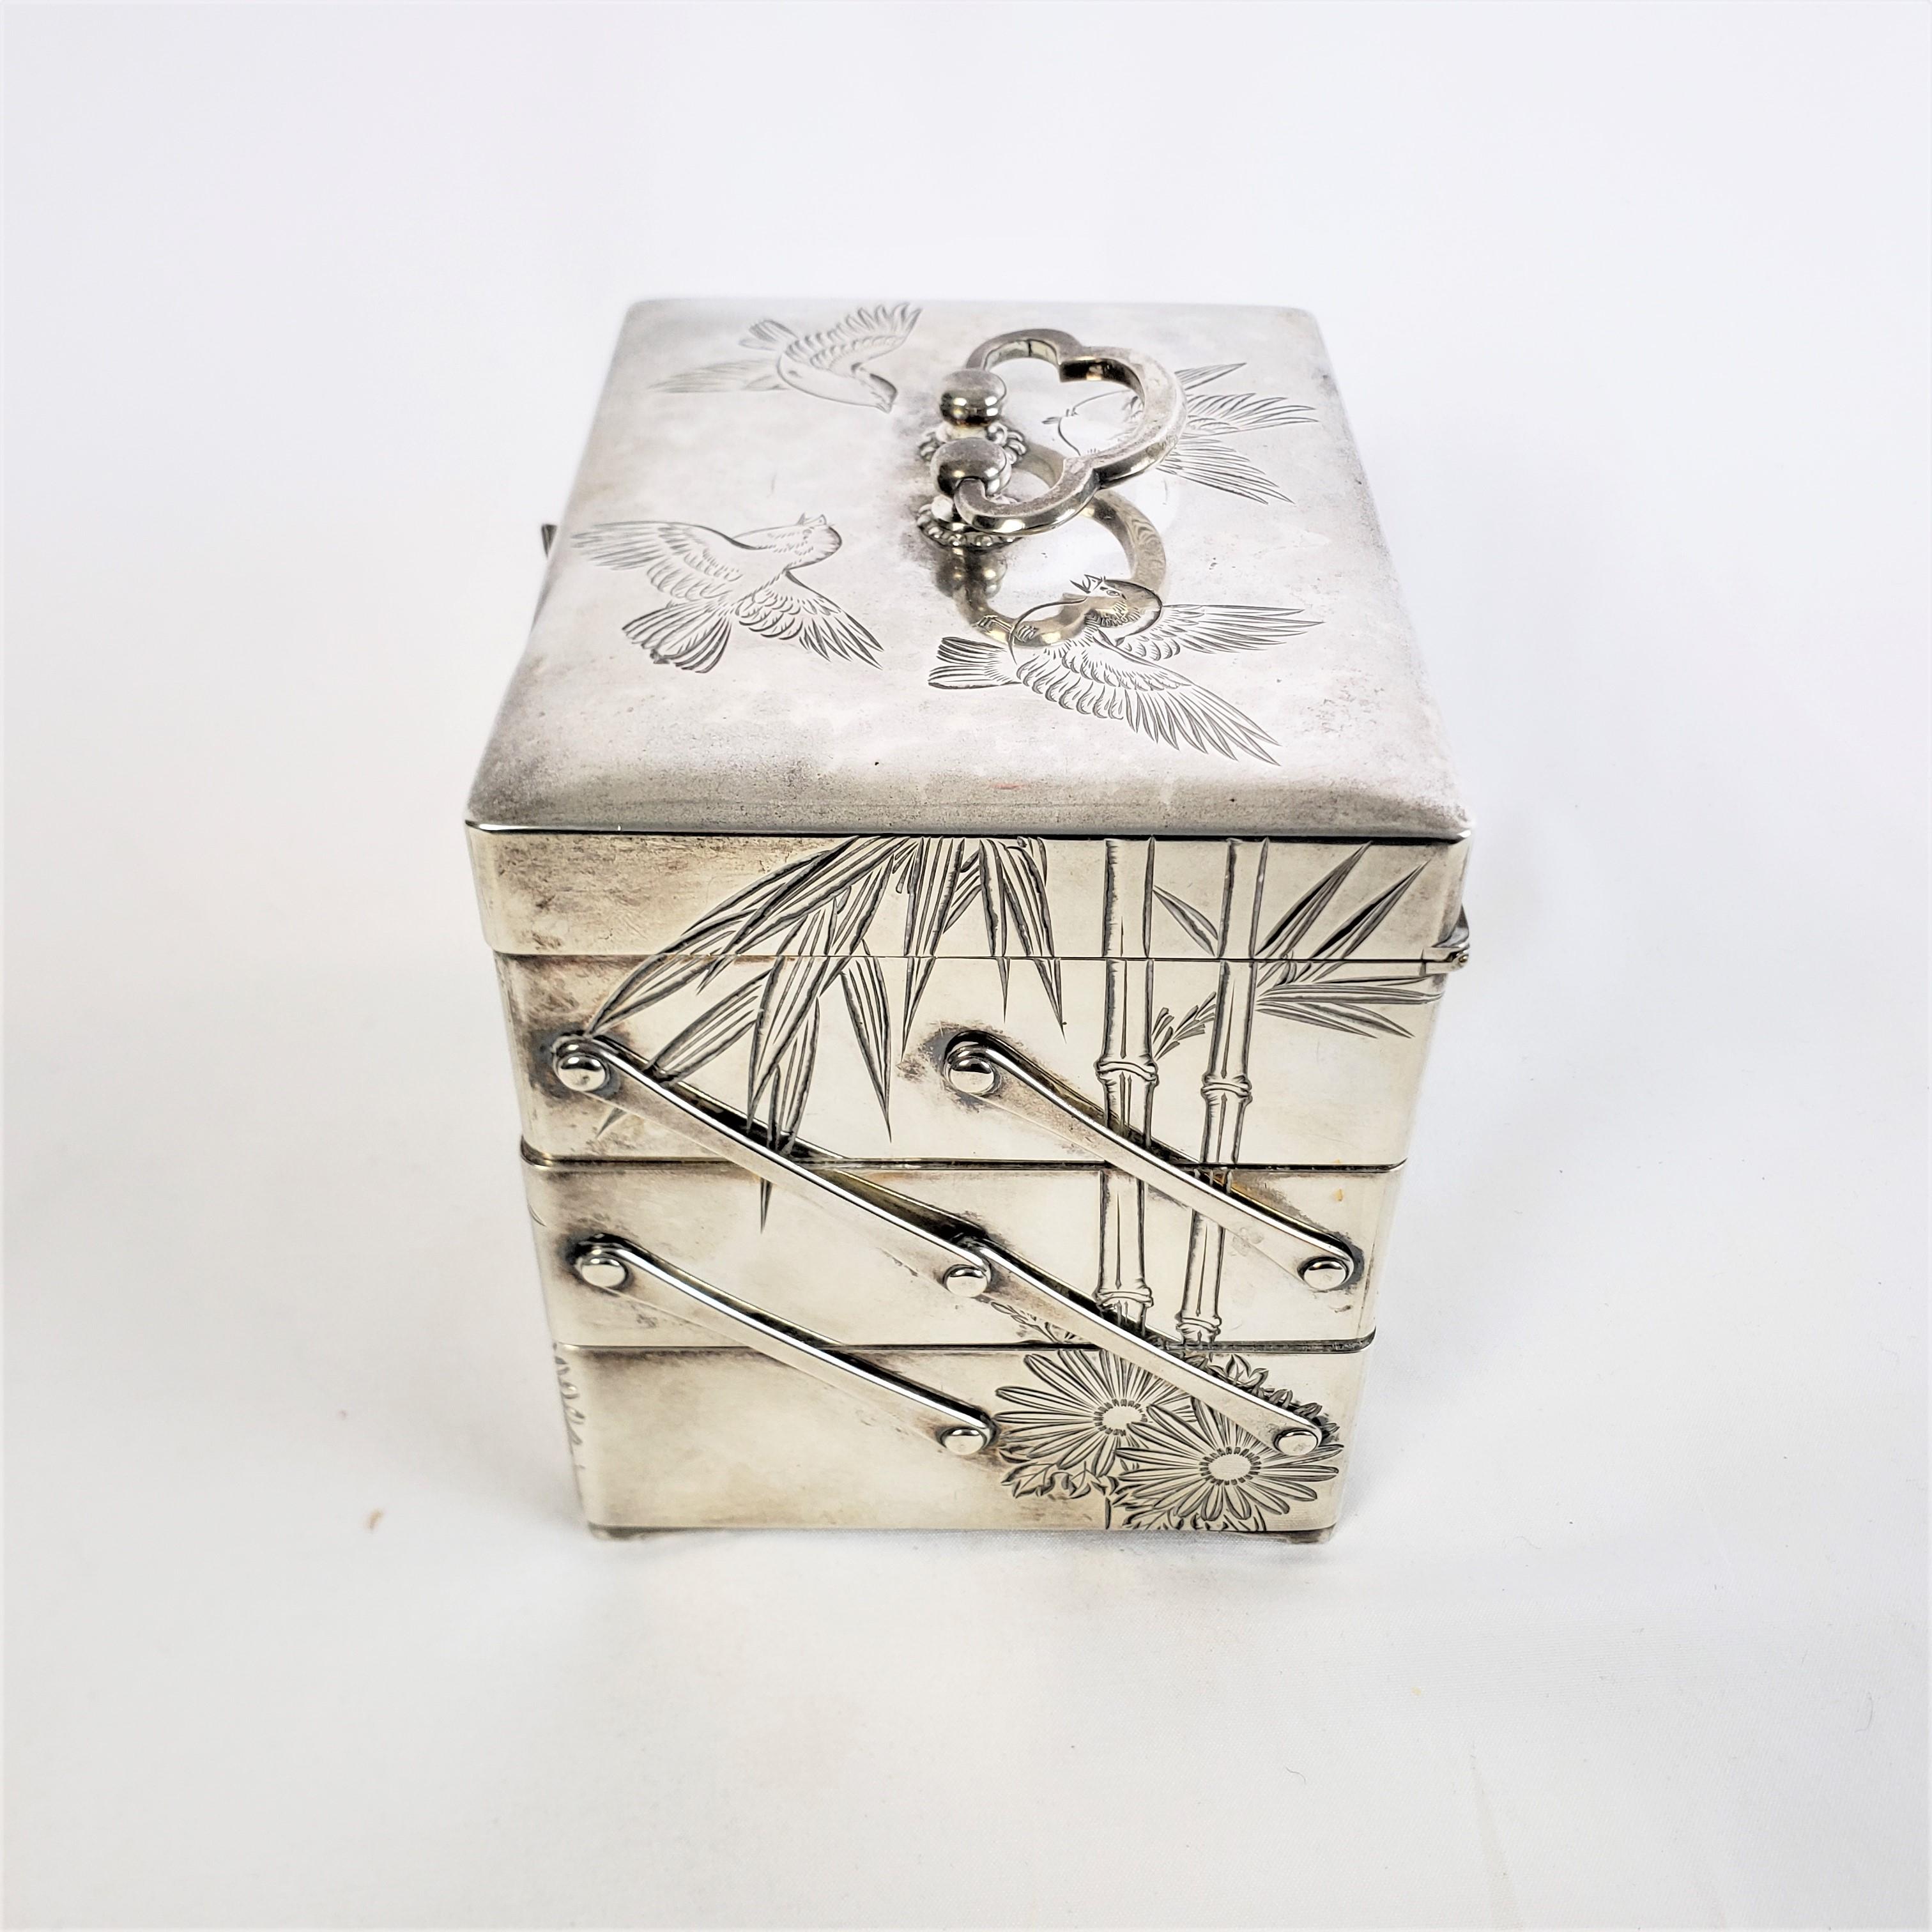 Machine-Made Antique Japanese Silver Accordian Jewelry Box with Engraved Bamboo & Flowers